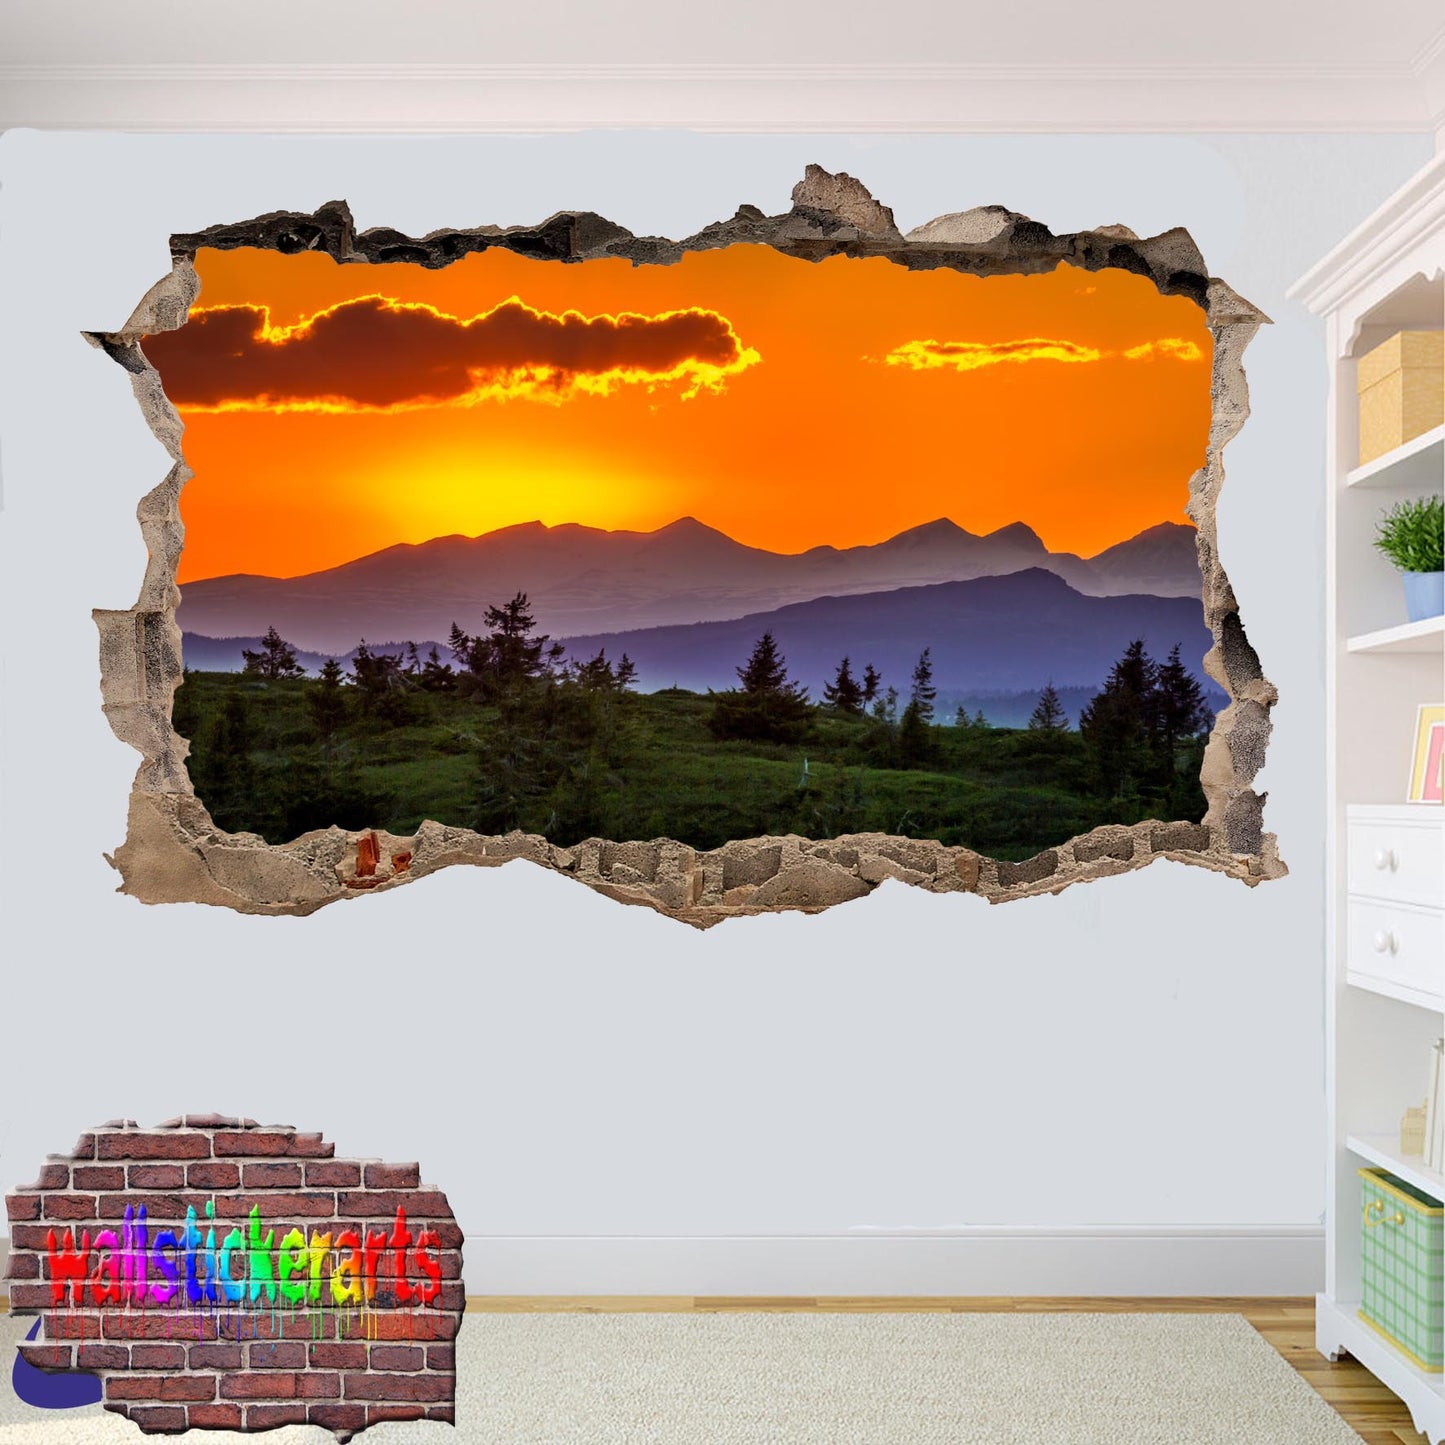 Mountains Majestic Sunset 3d Art Wall Sticker Mural Room Office Shop Decoration Decal YC0